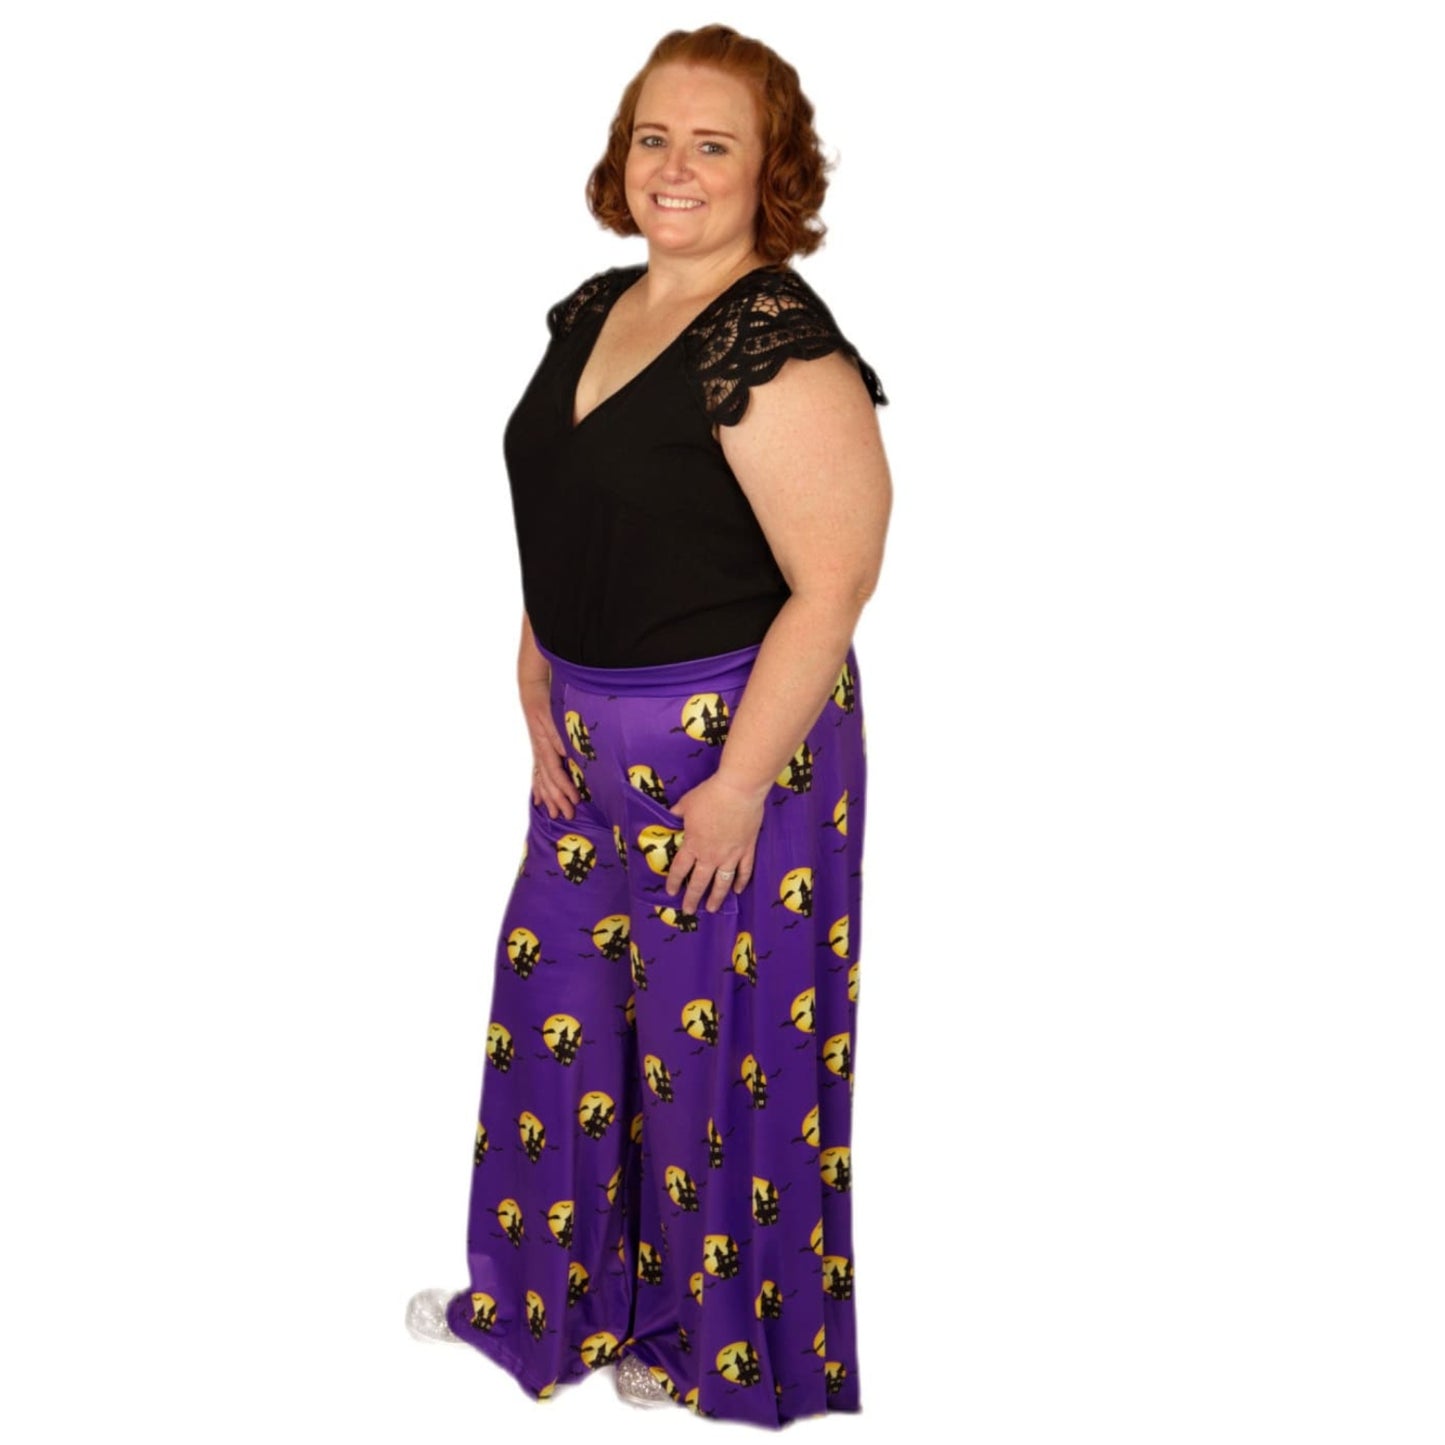 Haunted House Wide Leg Pants by RainbowsAndFairies.com.au (Addams Family - Bats - Purple - Pants With Pockets - Vintage Inspired - Flares - Halloween) - SKU: CL_WIDEL_HAUNT_ORG - Pic-02